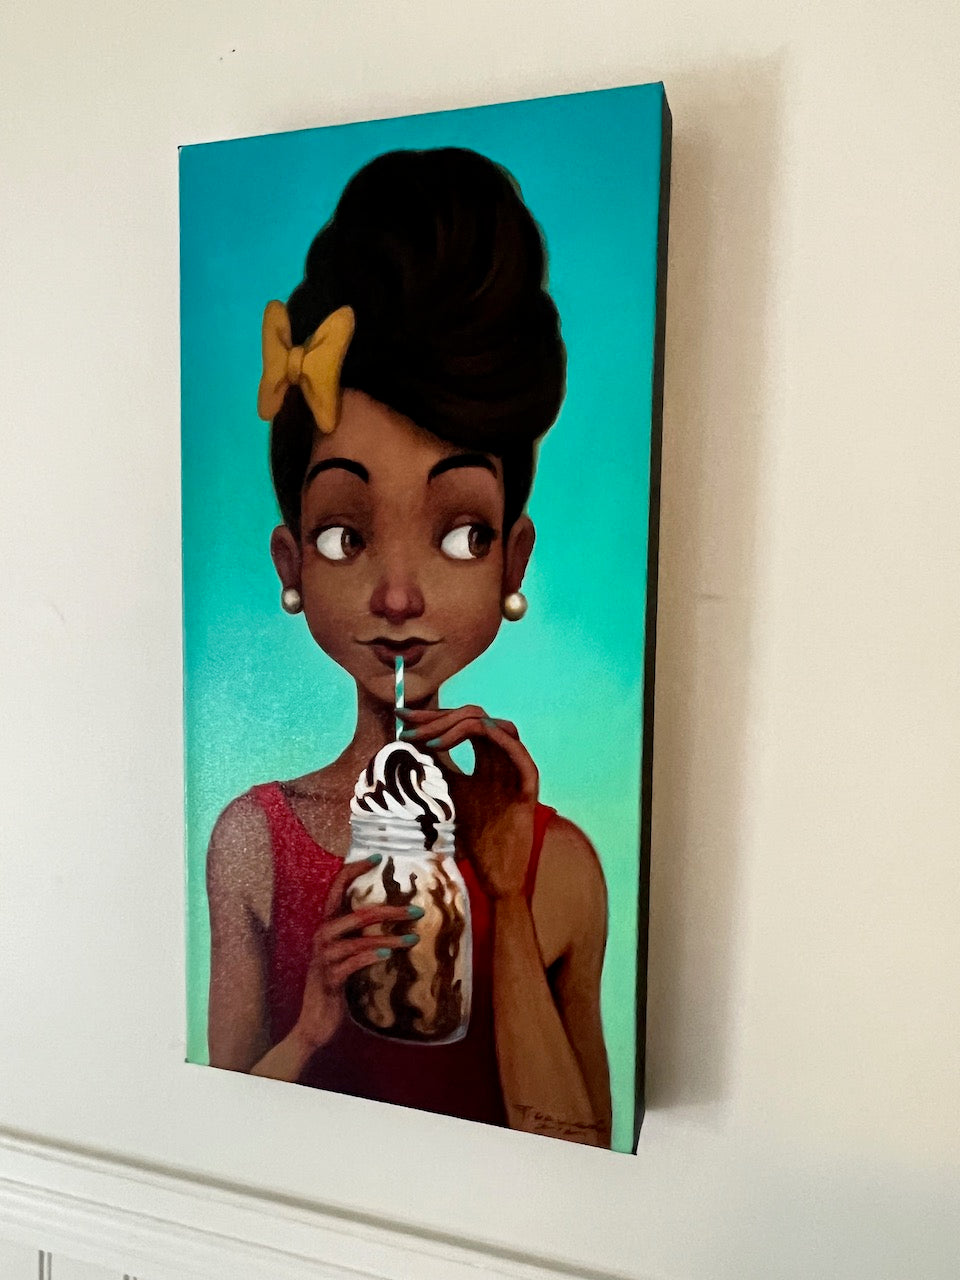 Figurative portrait of young, black girl sipping a chocolate milkshake. She wears a yellow bow in her hair and a red shirt.